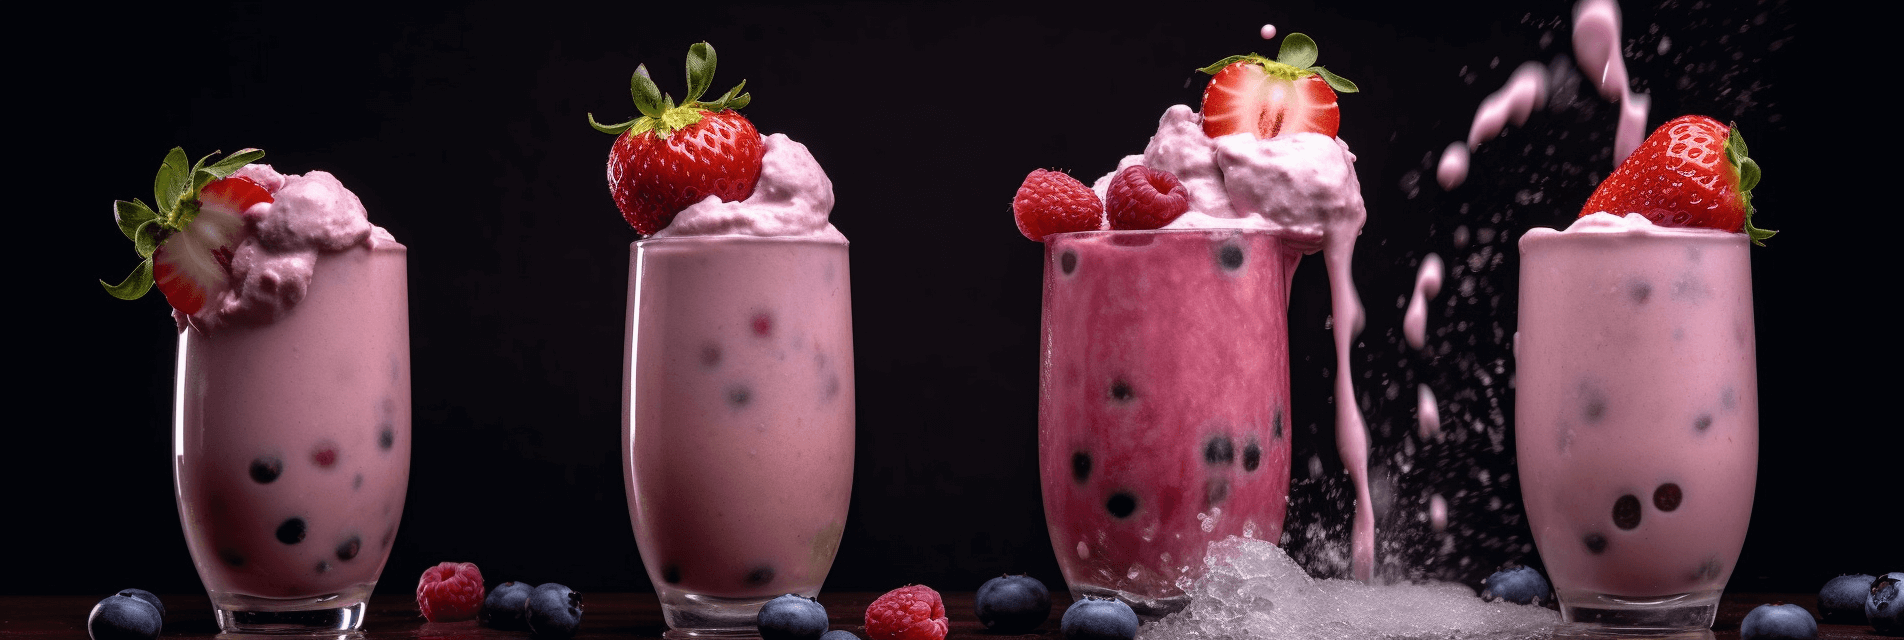 Berrylicious Creations: Savor the Delight of Strawberry, Blackberry, and Blueberry Smoothie Marvels